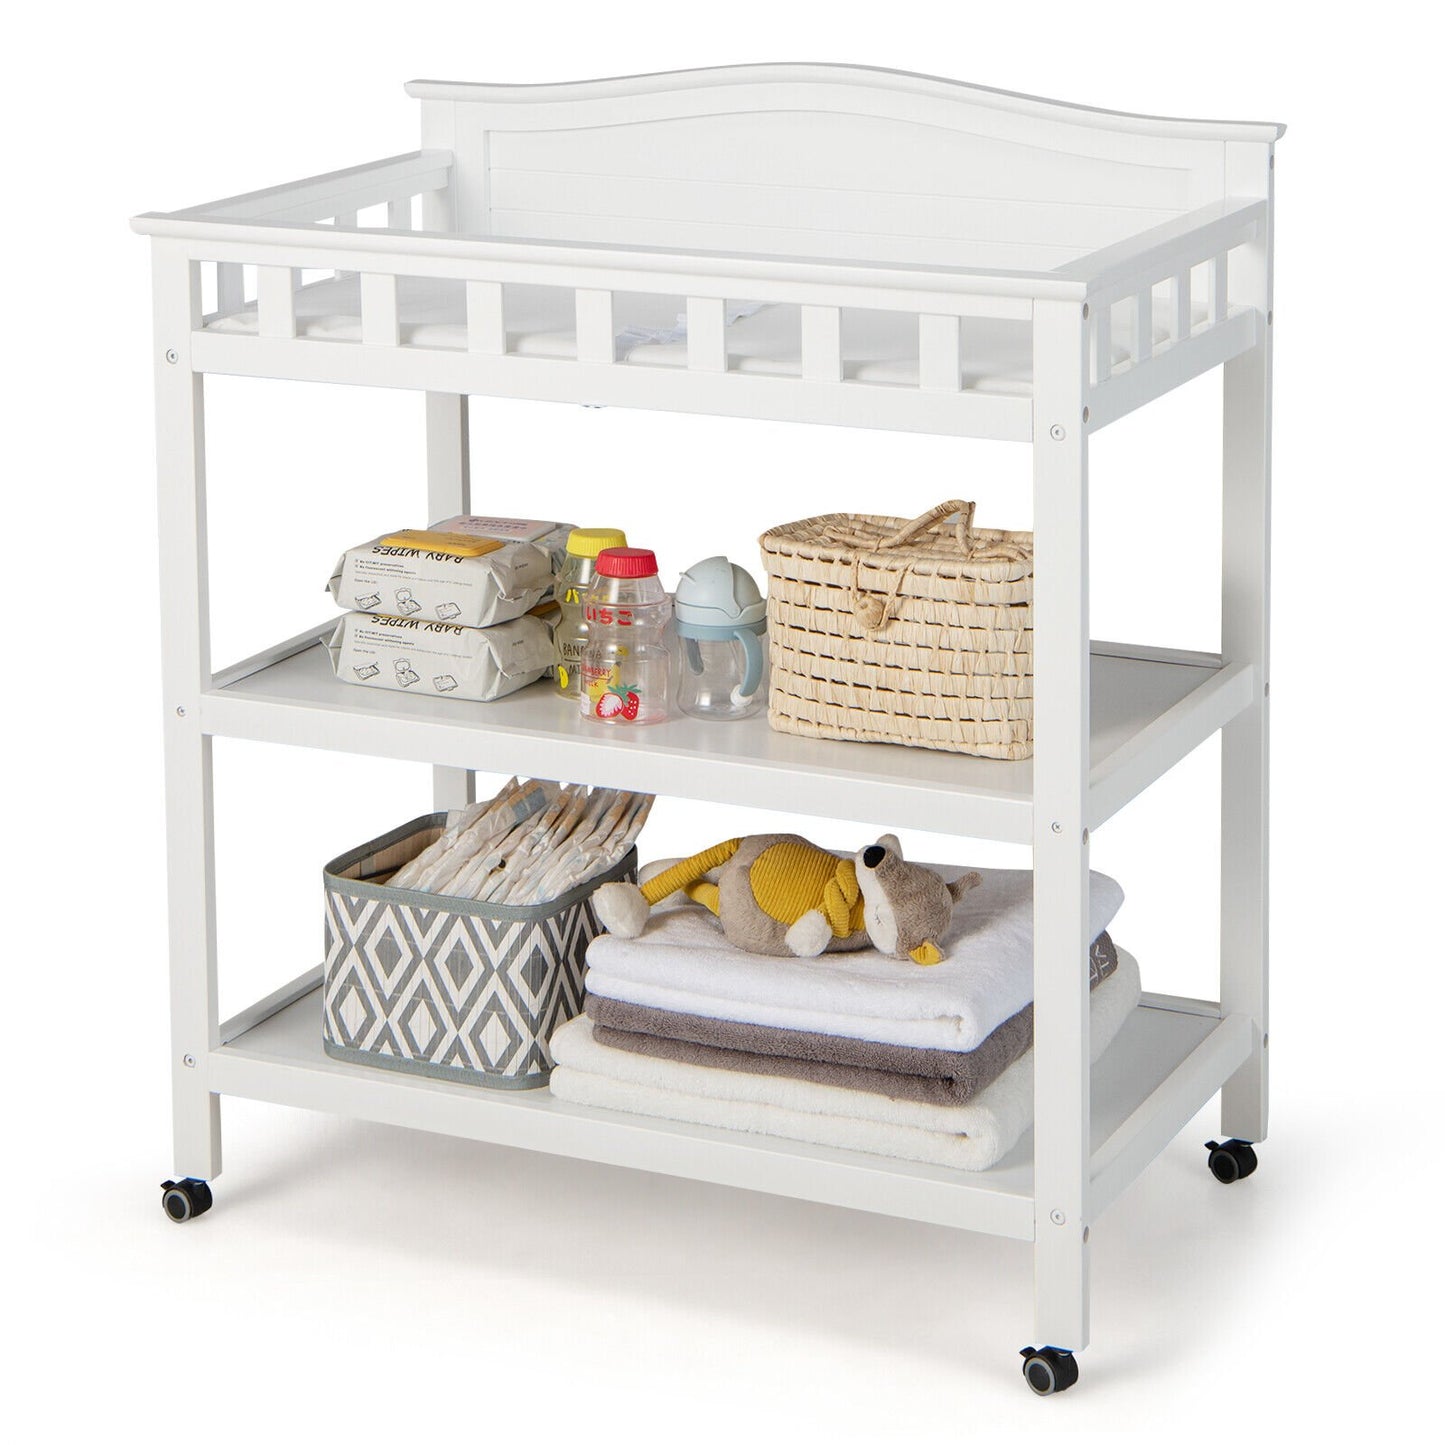 Mobile Changing Table with Waterproof Pad and 2 Open Shelves, White